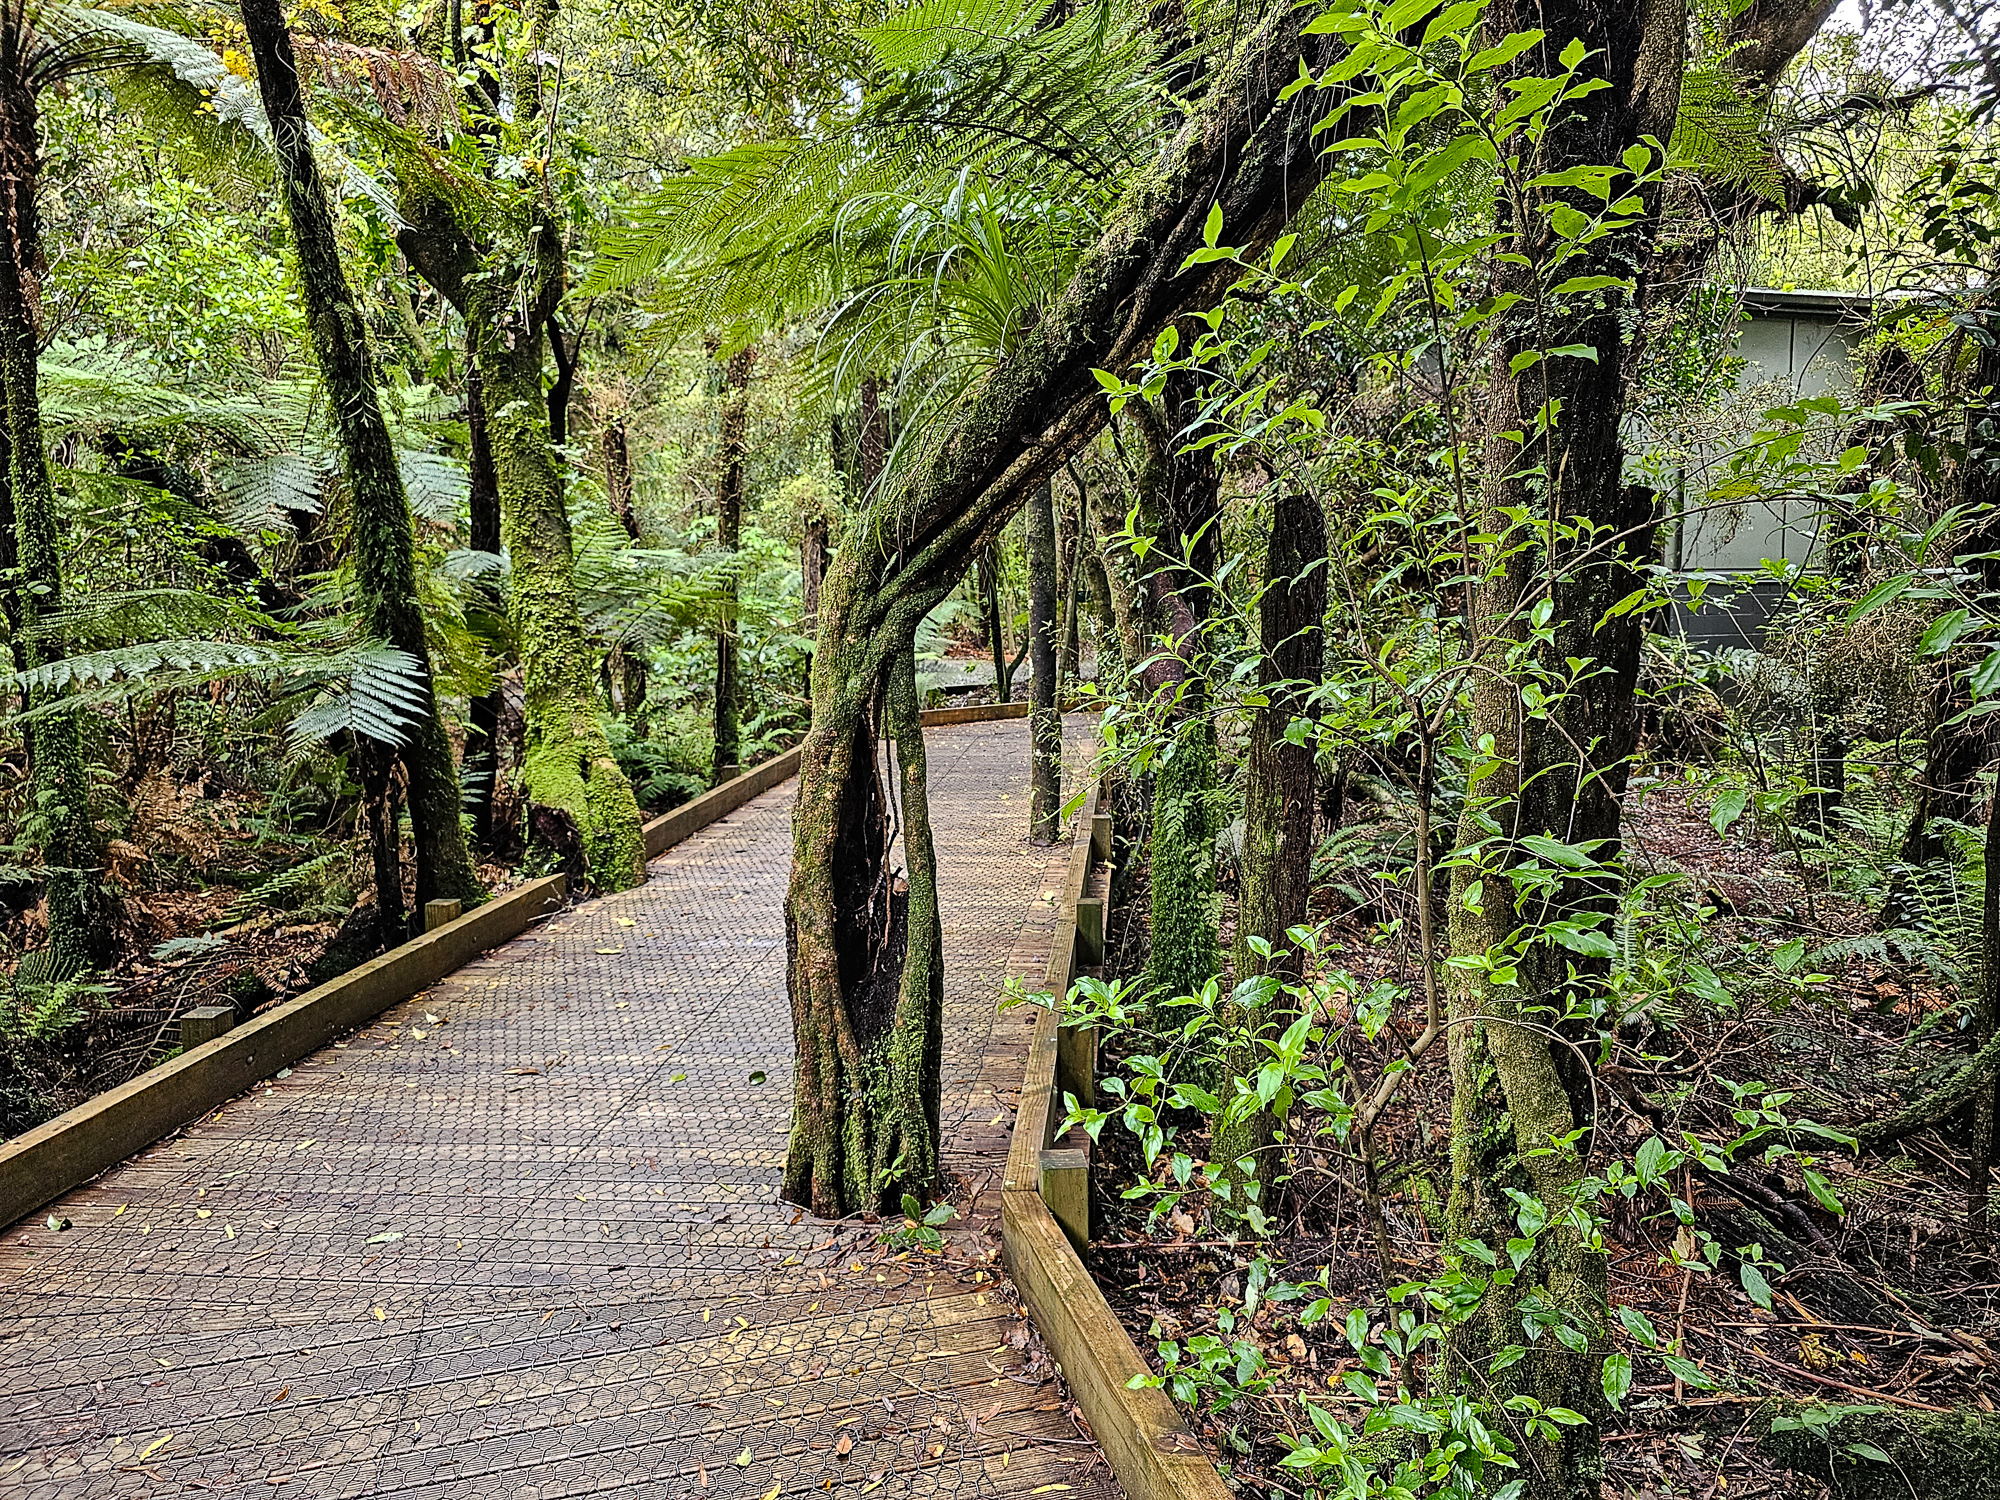 Walking path at Pukaha National Wildlife Centre, a favourite stop on our Auckland to Wellington drive